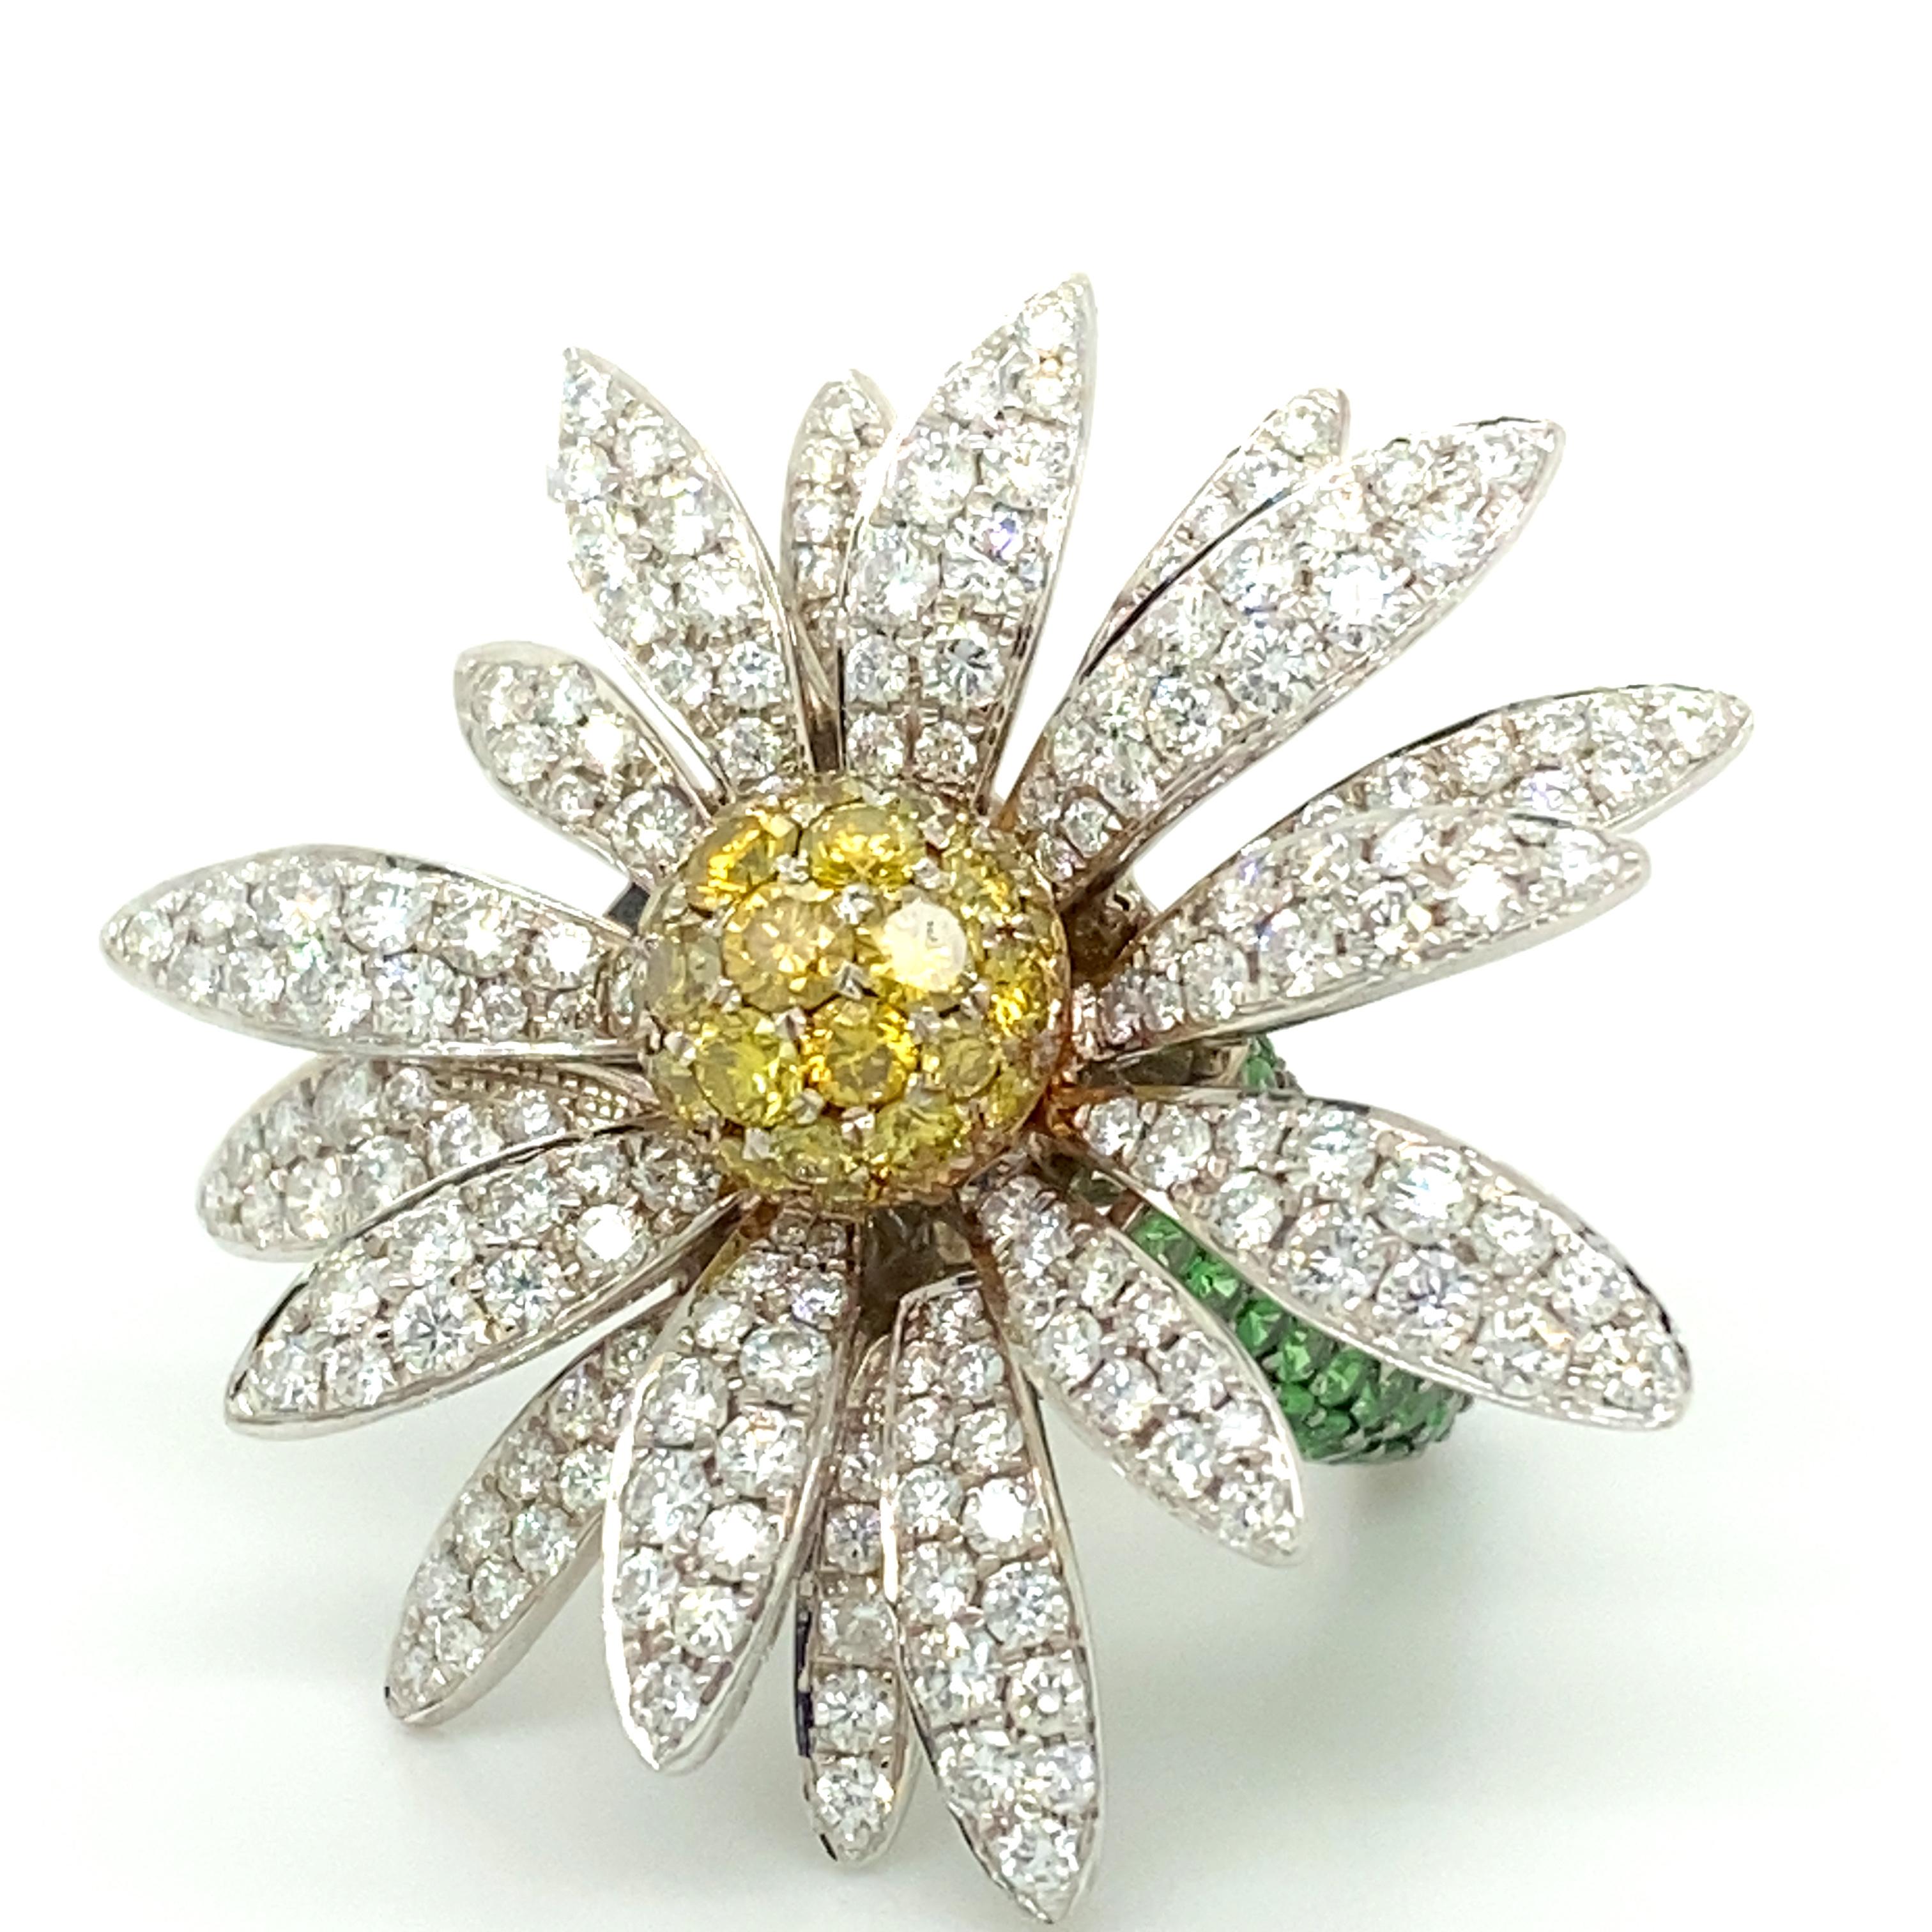 This cheerful sparkling Daisy ring by SILLAM 1835 is a real eye-catcher and a joy for every wearer.

Artfully crafted in 18 karat white gold, this bijou is set in the centre with 29 brilliant-cut fancy yellow diamonds with a total weight of 1.25